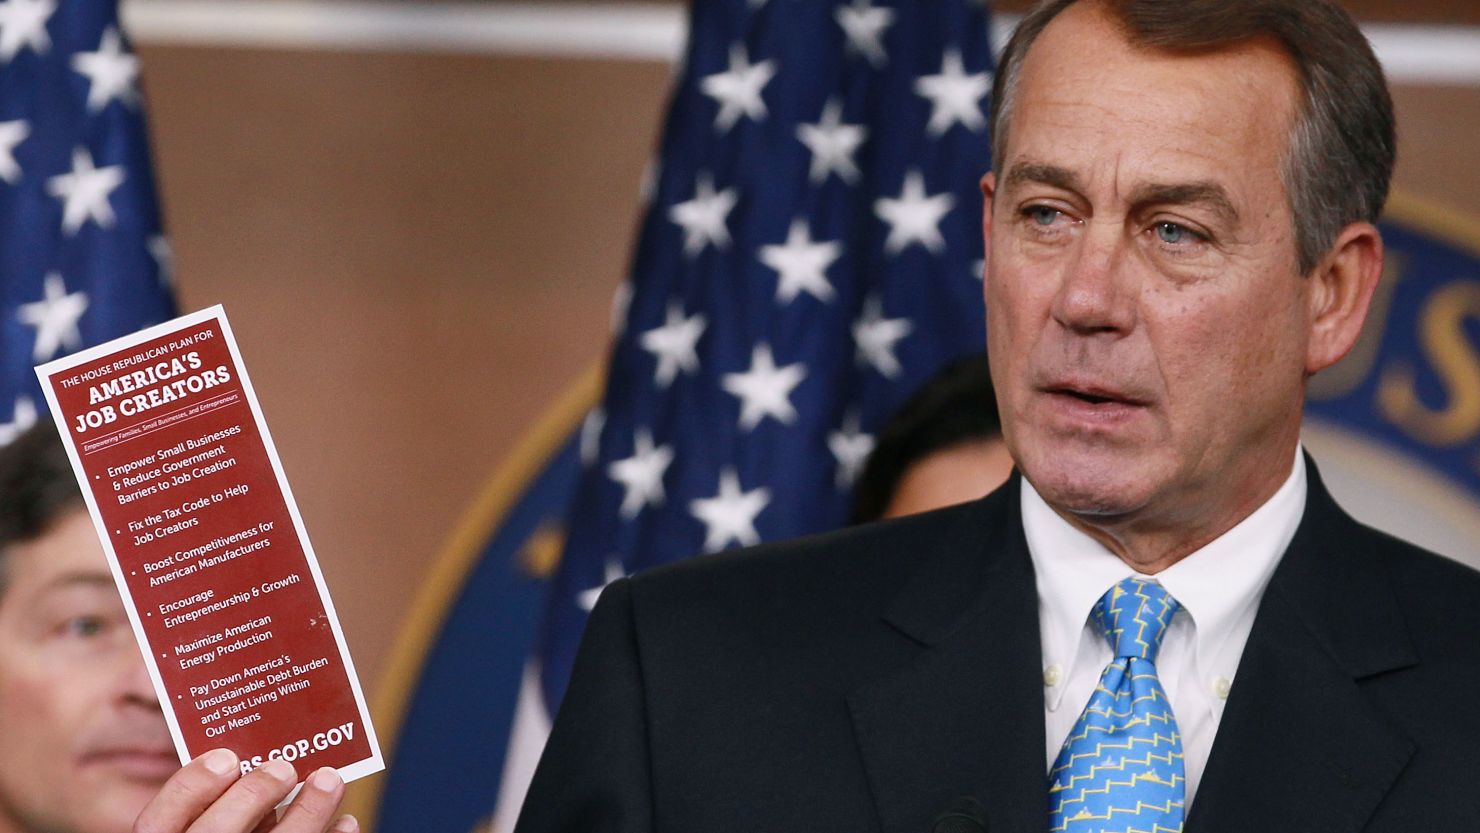 "60 Minutes" examined investments of Rep. John Boehner, above,  and Rep. Nancy Pelosi, among other members of congress.